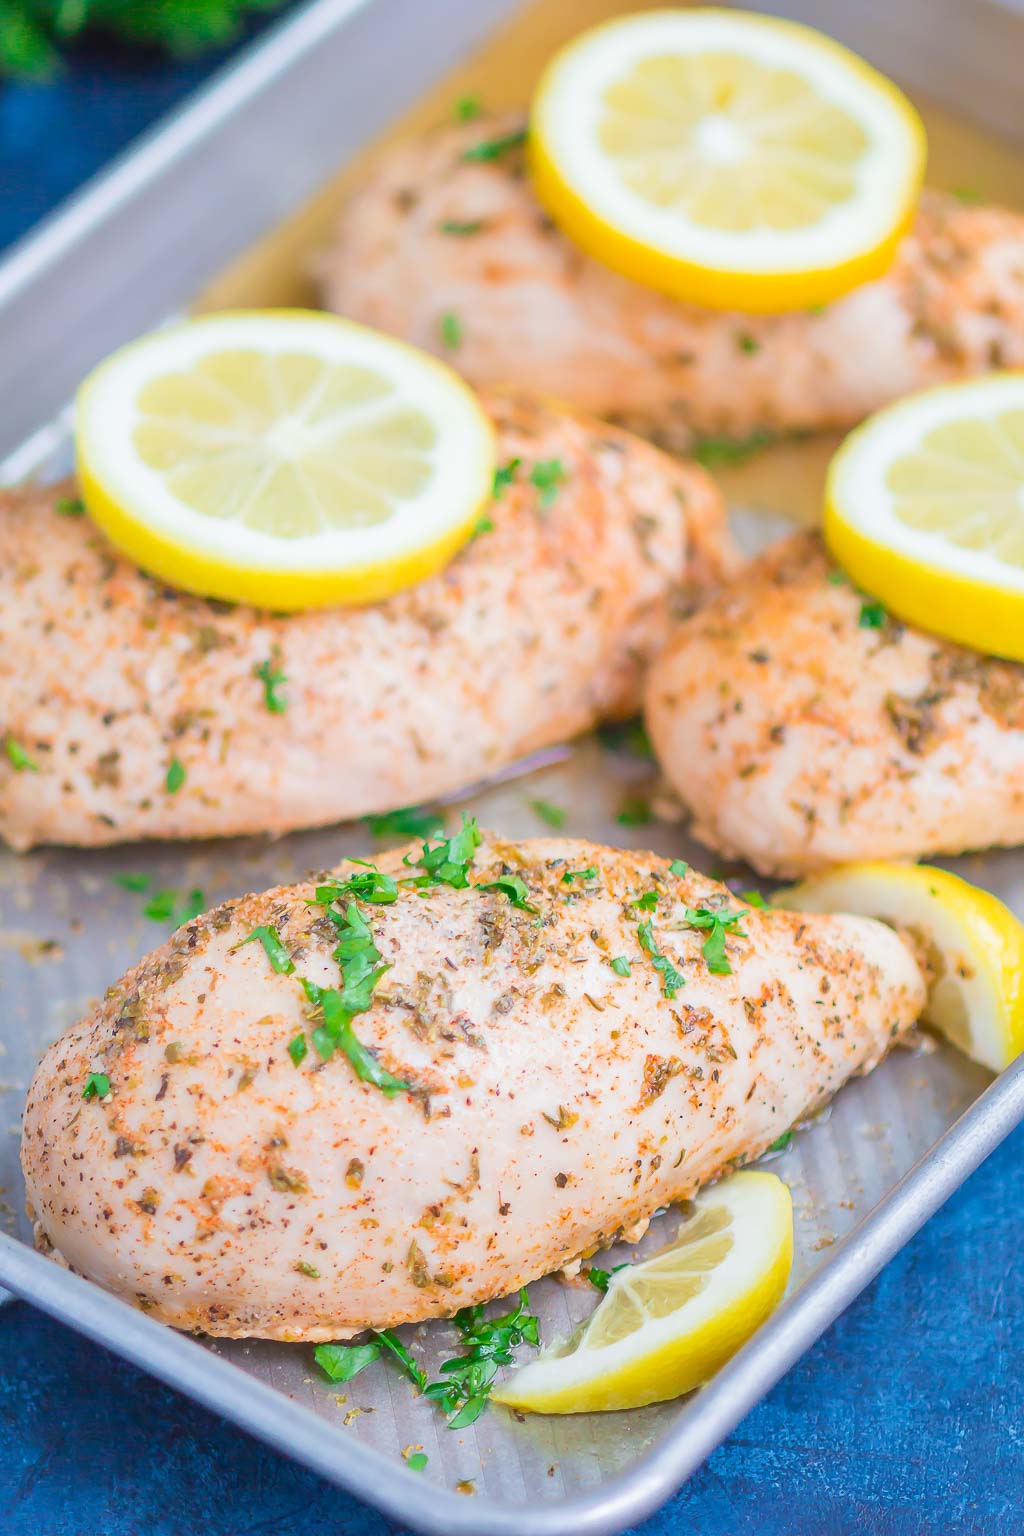 Baked Lemon Chicken is a simple dish that's loaded with flavor. With just a few ingredients, this chicken bakes up tender, juicy, and all-around delicious. Perfect for a busy weeknight dinner!